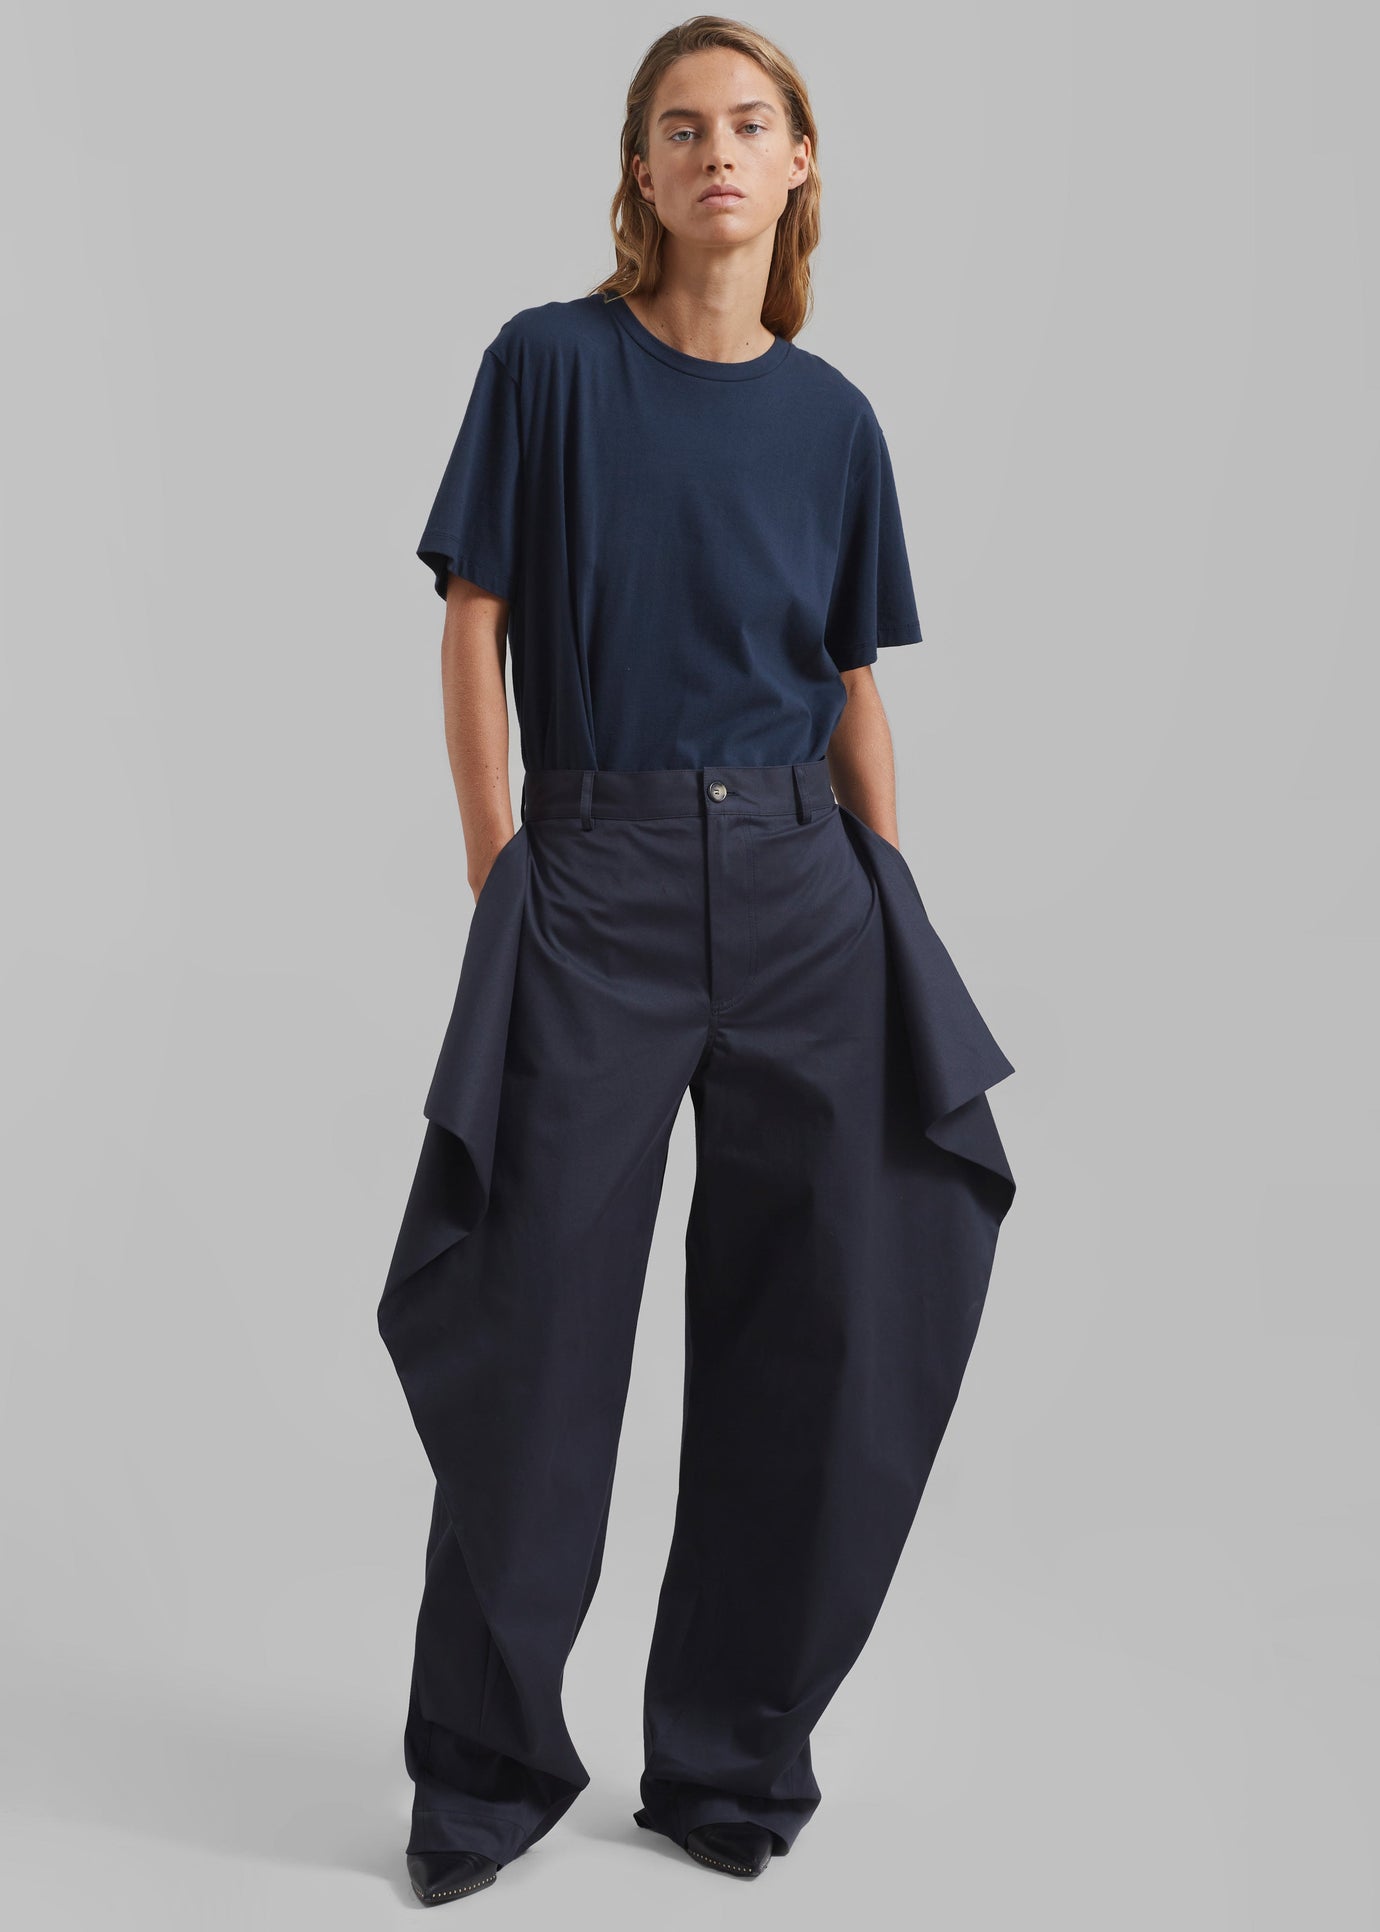 JW Anderson Kite Trousers - Navy